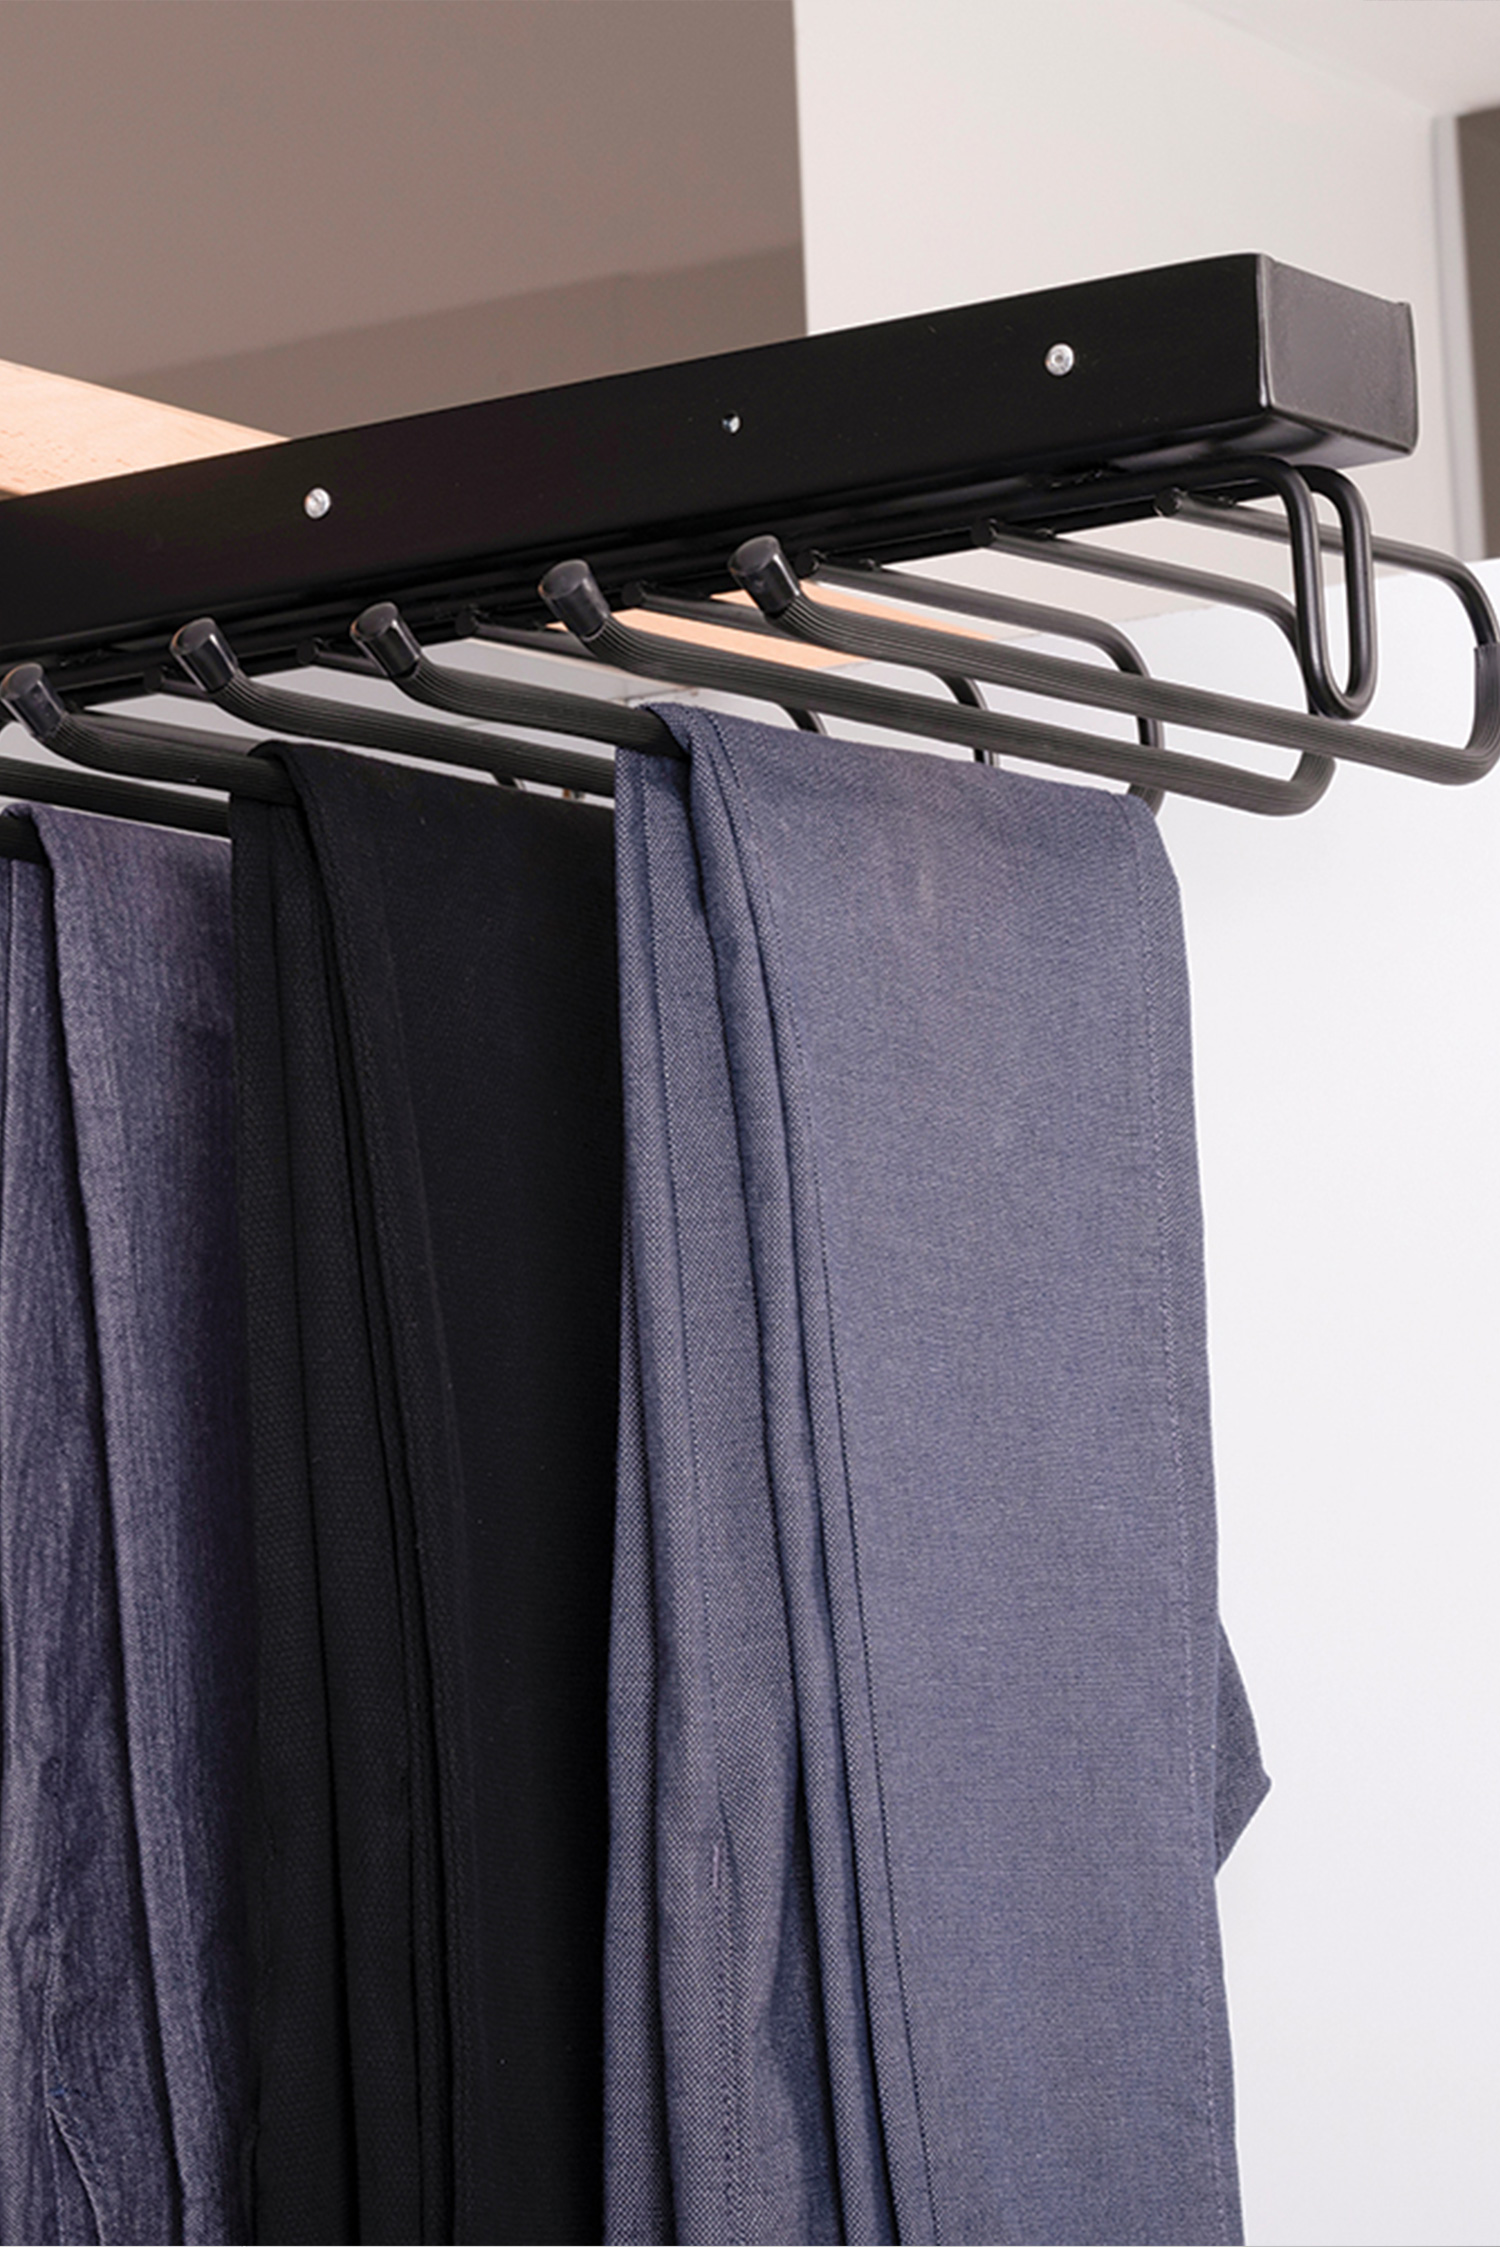 Telescopic Trouser Rack With Rail Mounted Top